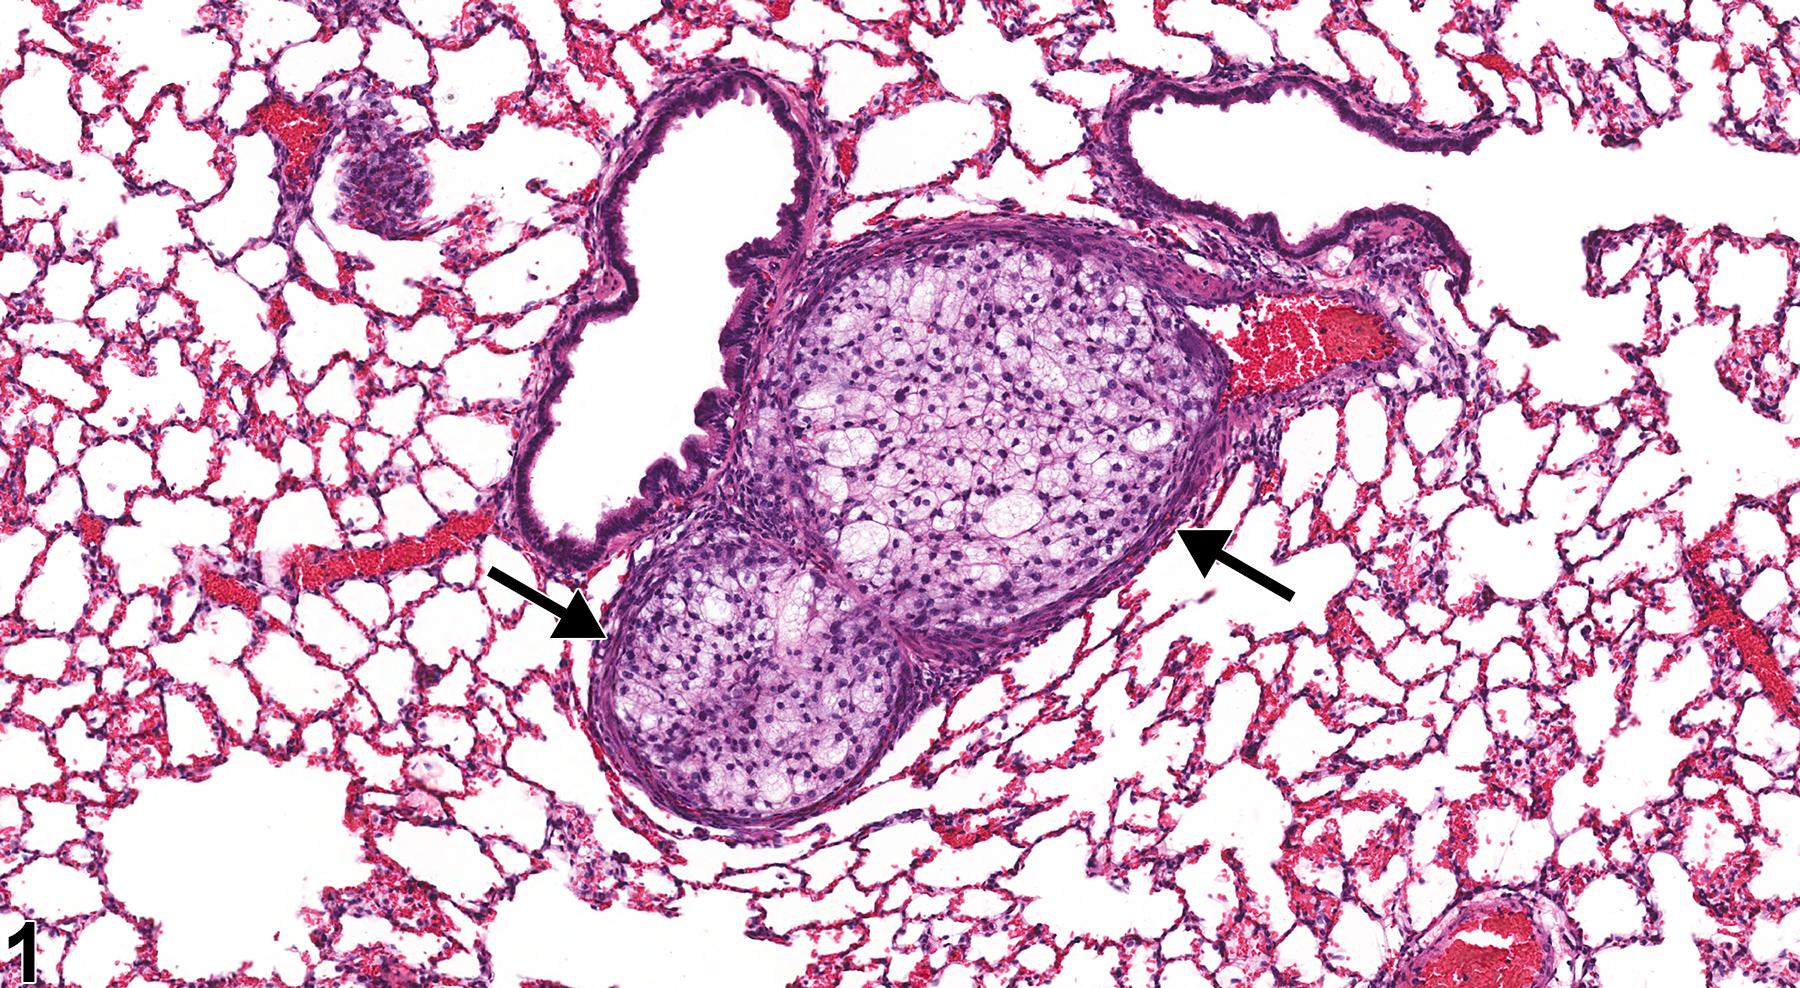 Image of embolus in the lung, artery from a male F344/N rat in a chronic study